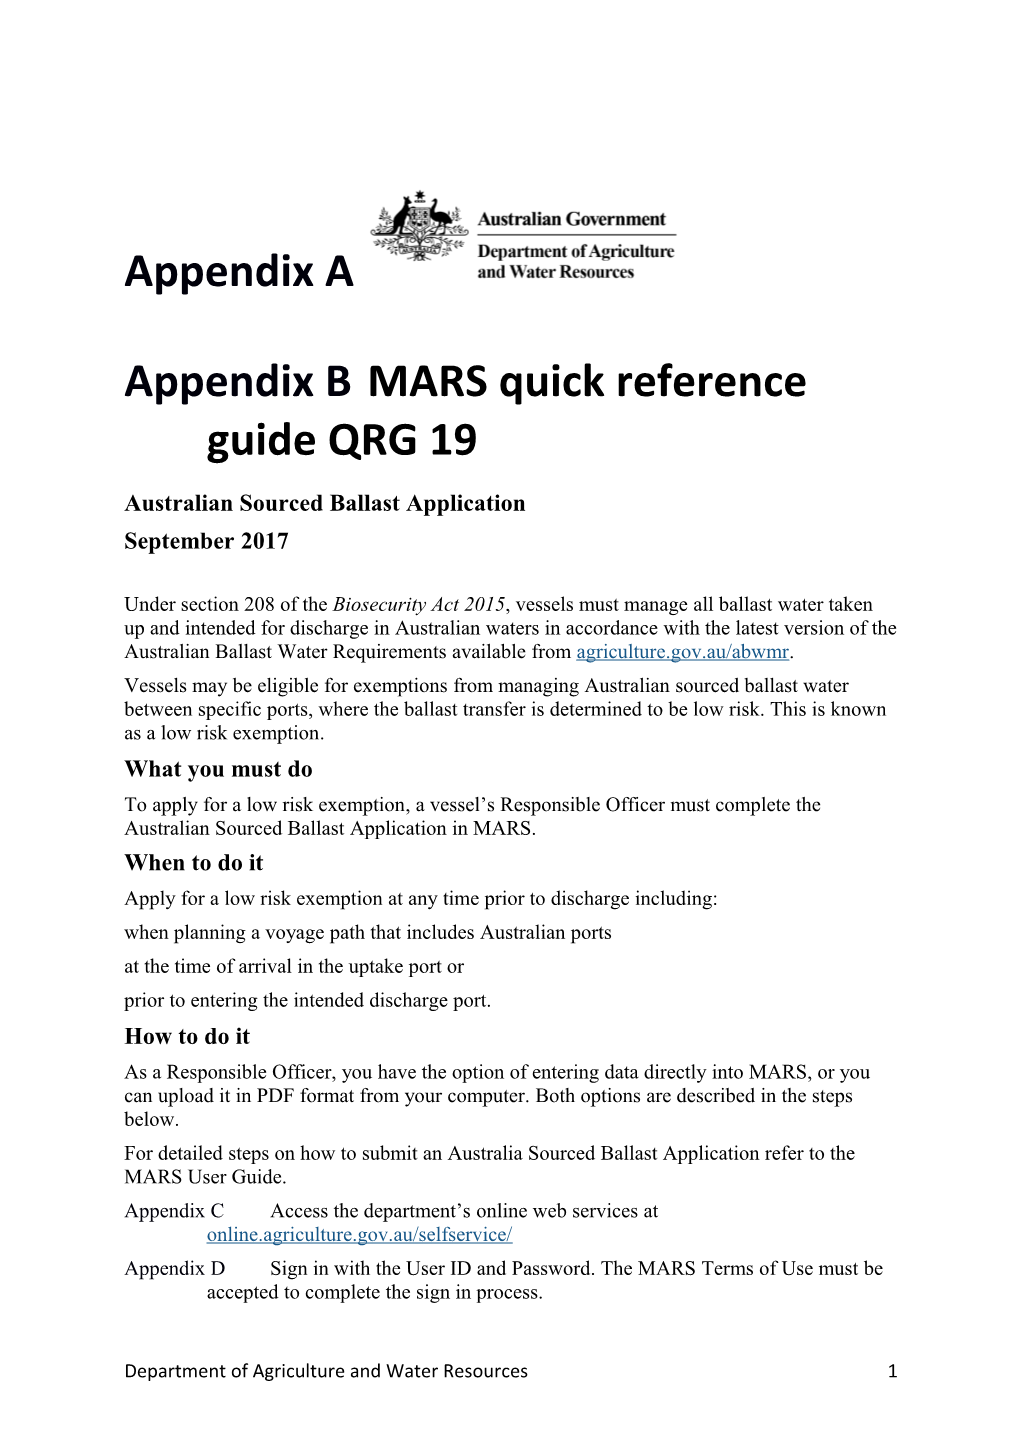 MARS Quick Reference Guide QRG19